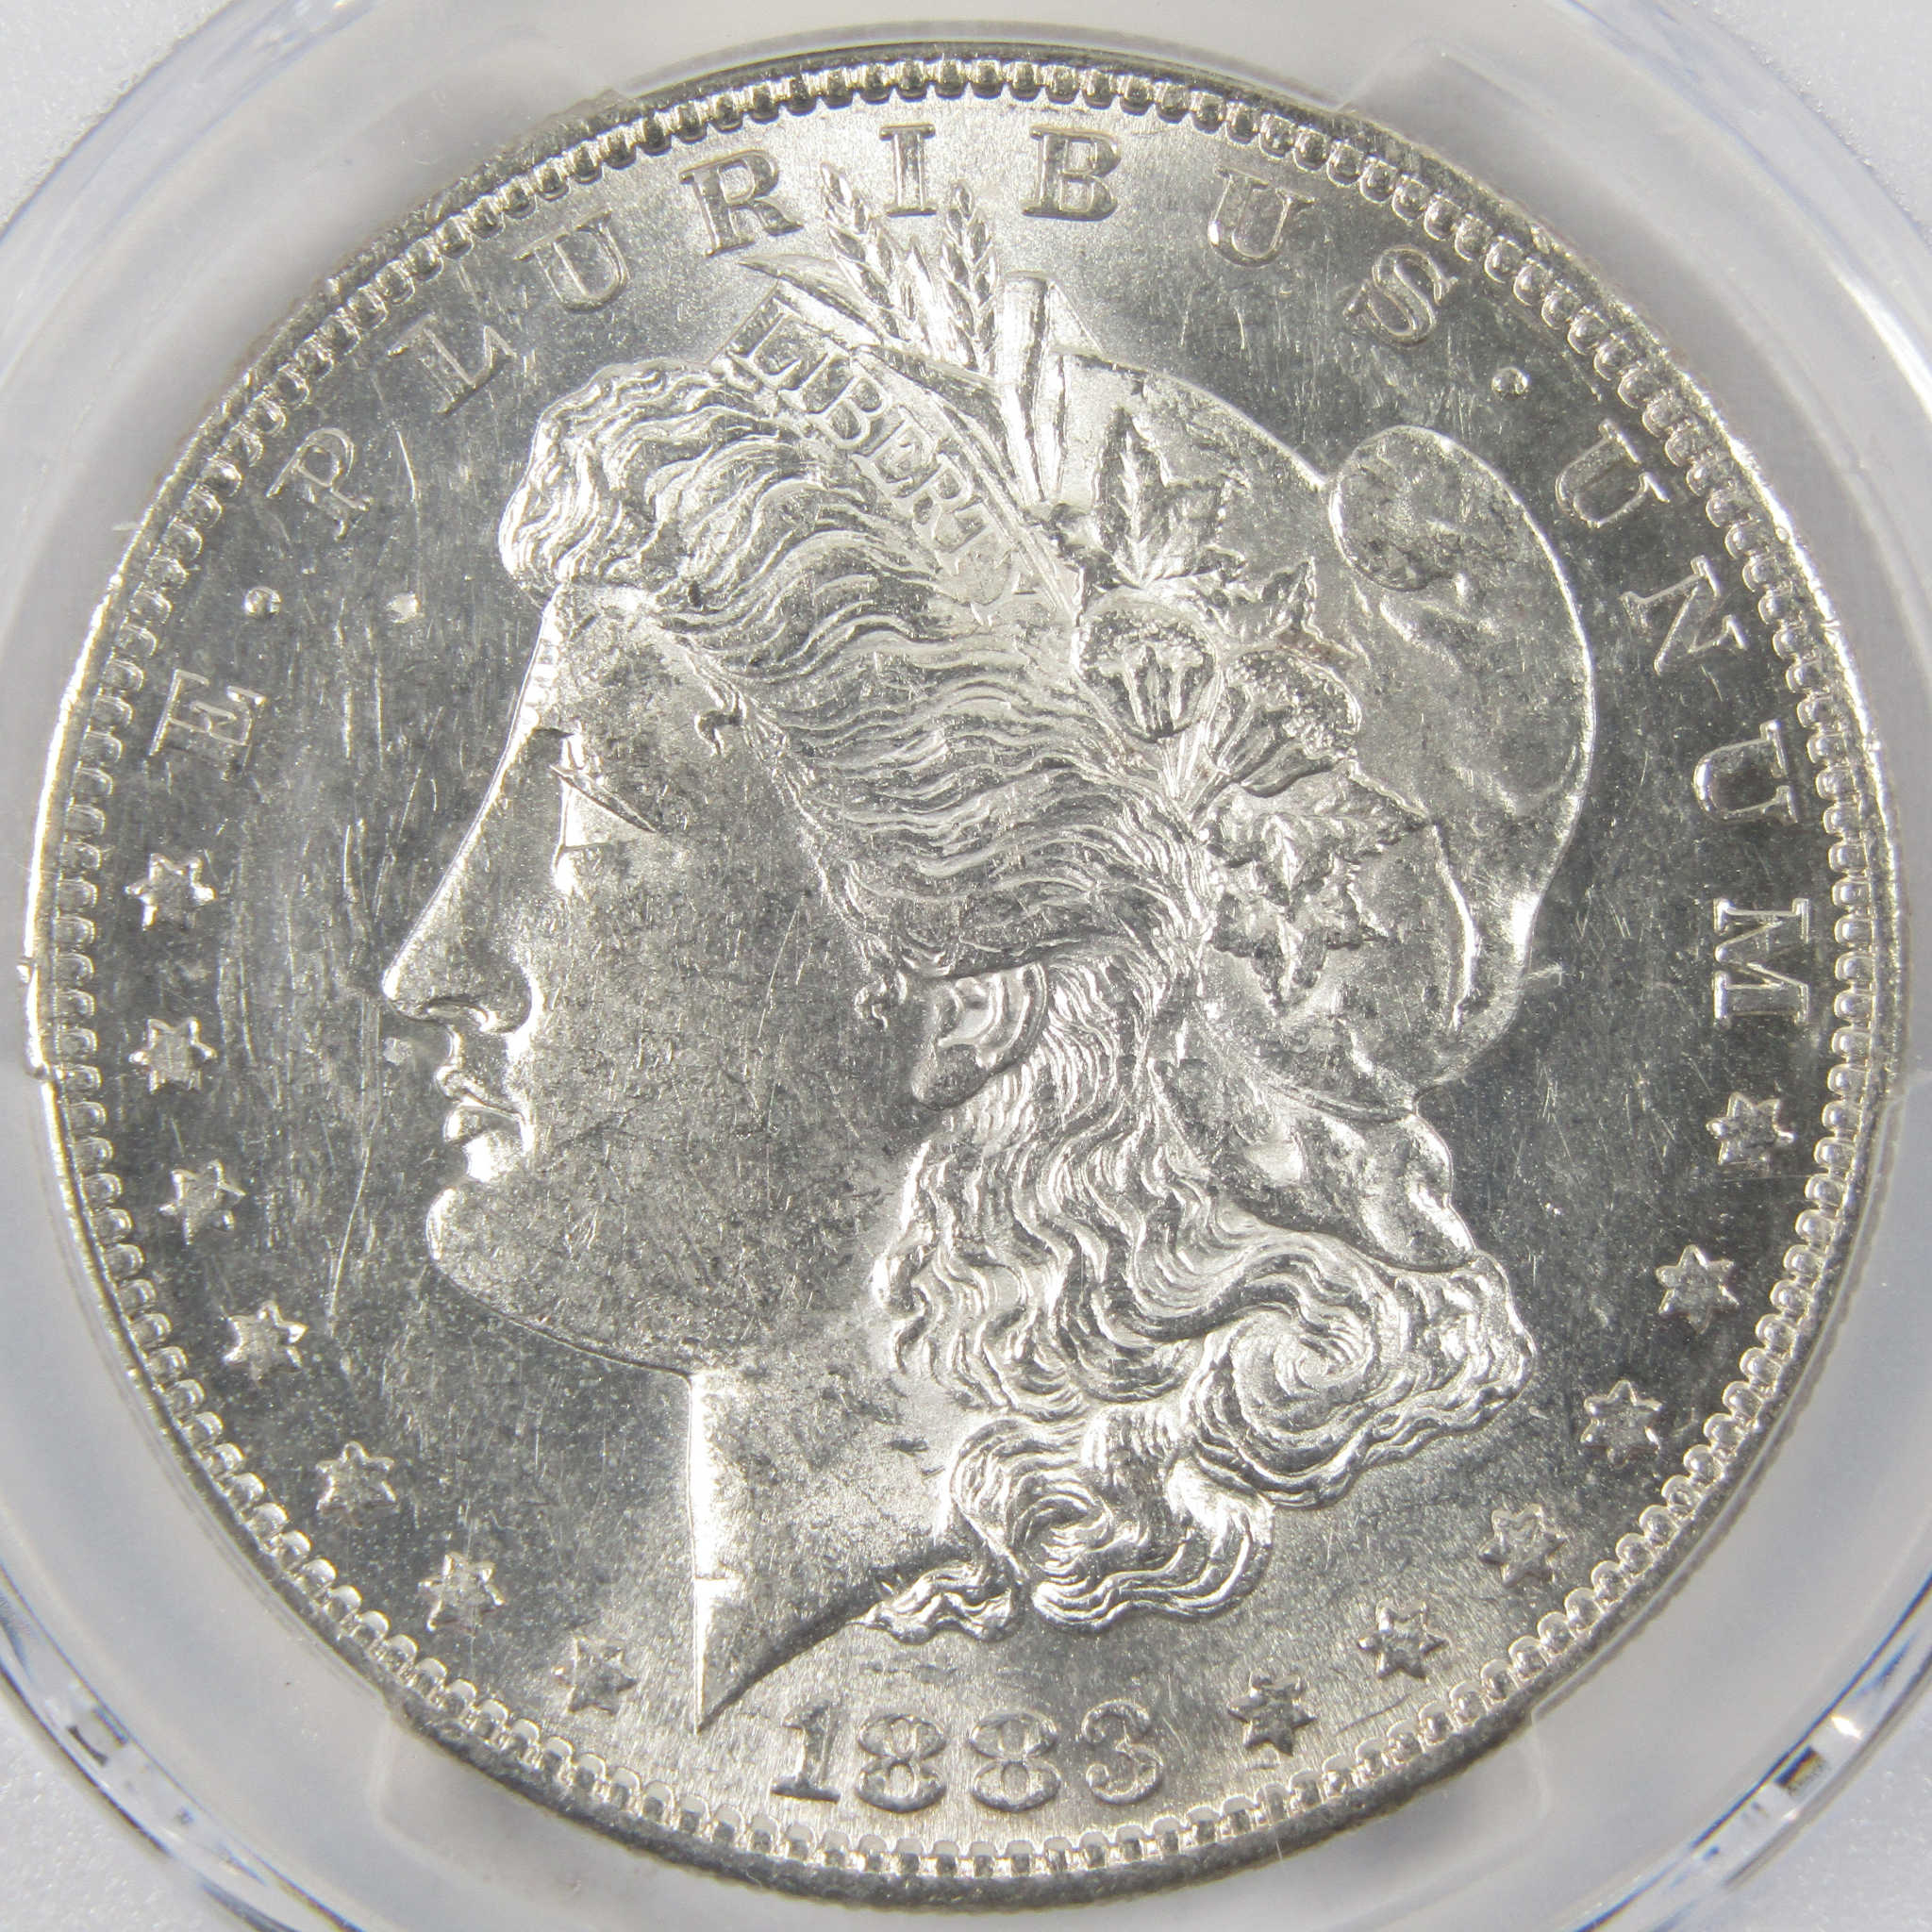 1883 S Morgan Dollar AU 58 PCGS 90% Silver $1 Coin SKU:I9734 - Morgan coin - Morgan silver dollar - Morgan silver dollar for sale - Profile Coins &amp; Collectibles